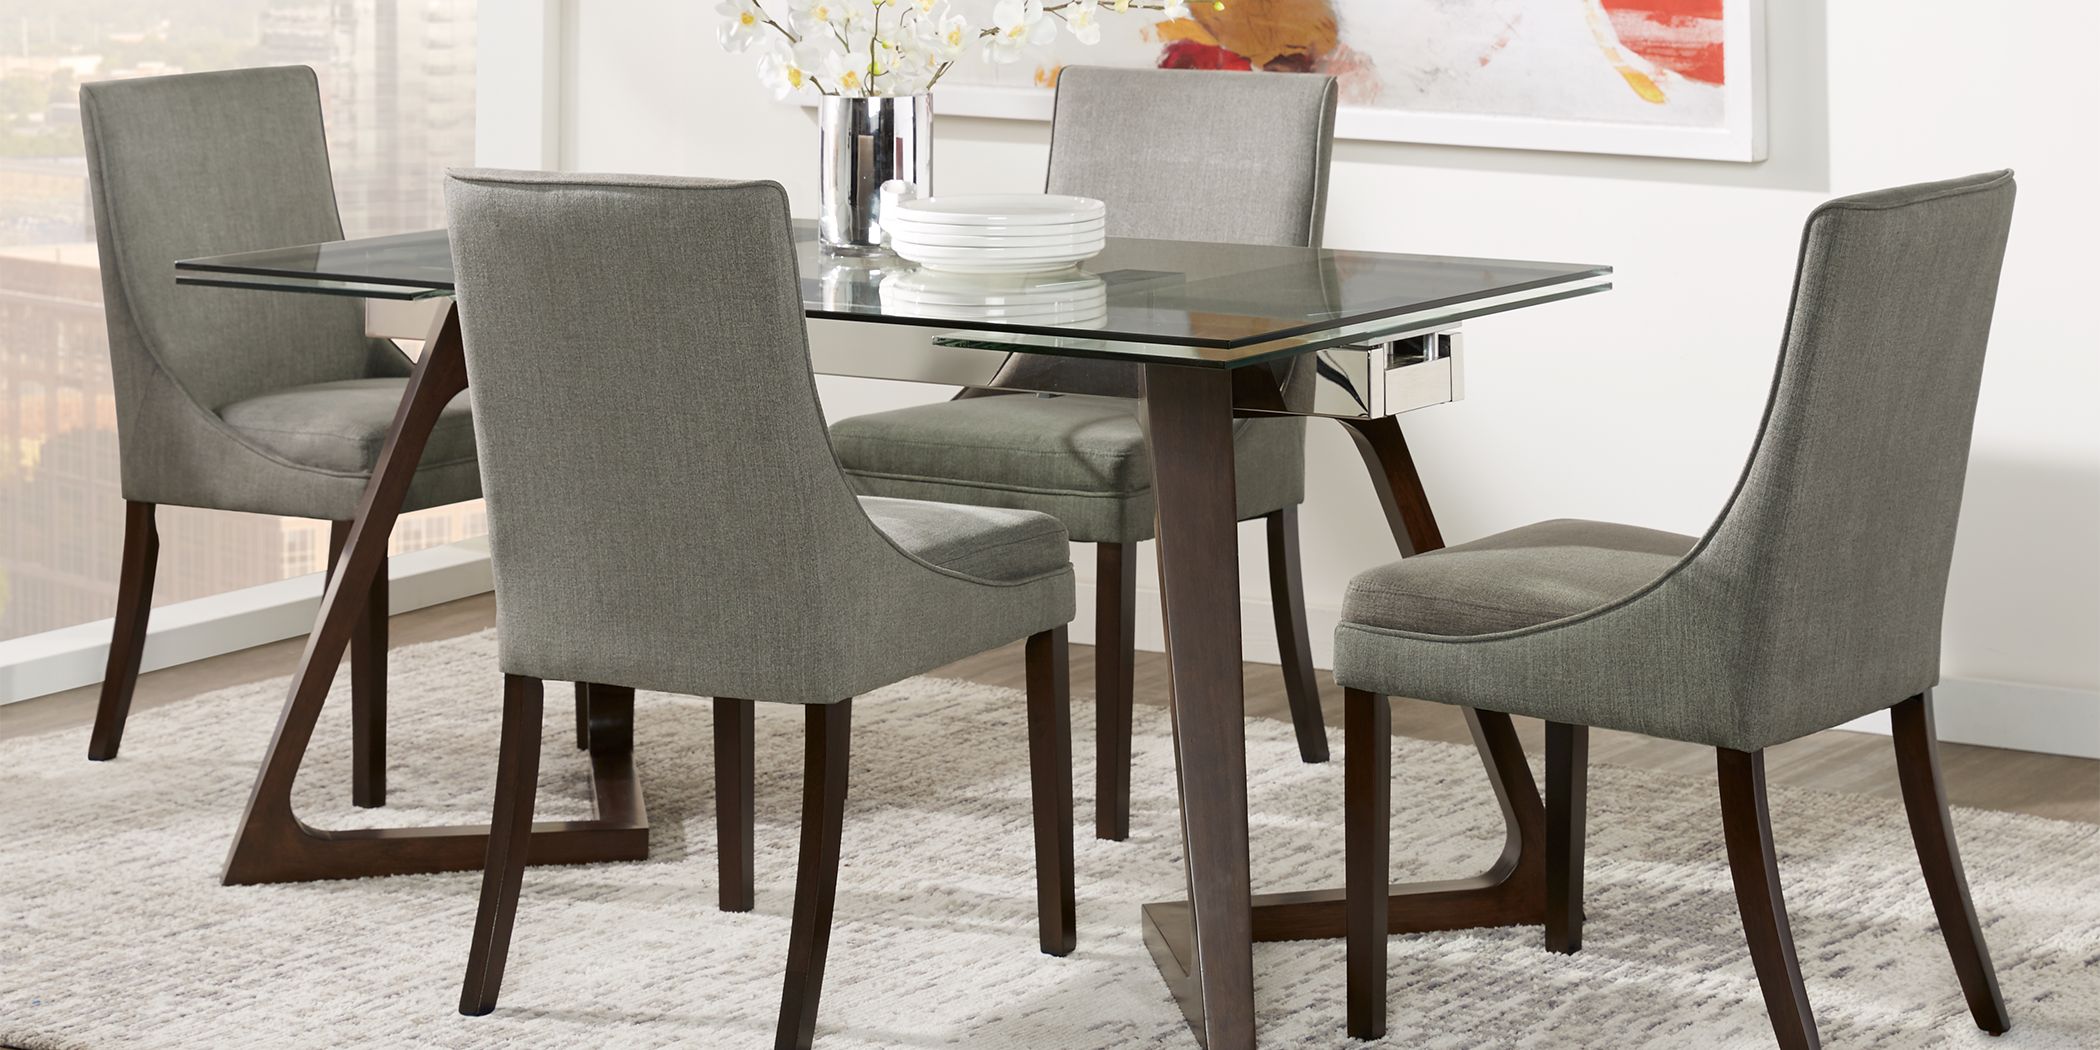 Amhearst Brown 5 Pc Rectangle Dining Set with Graphite Chairs